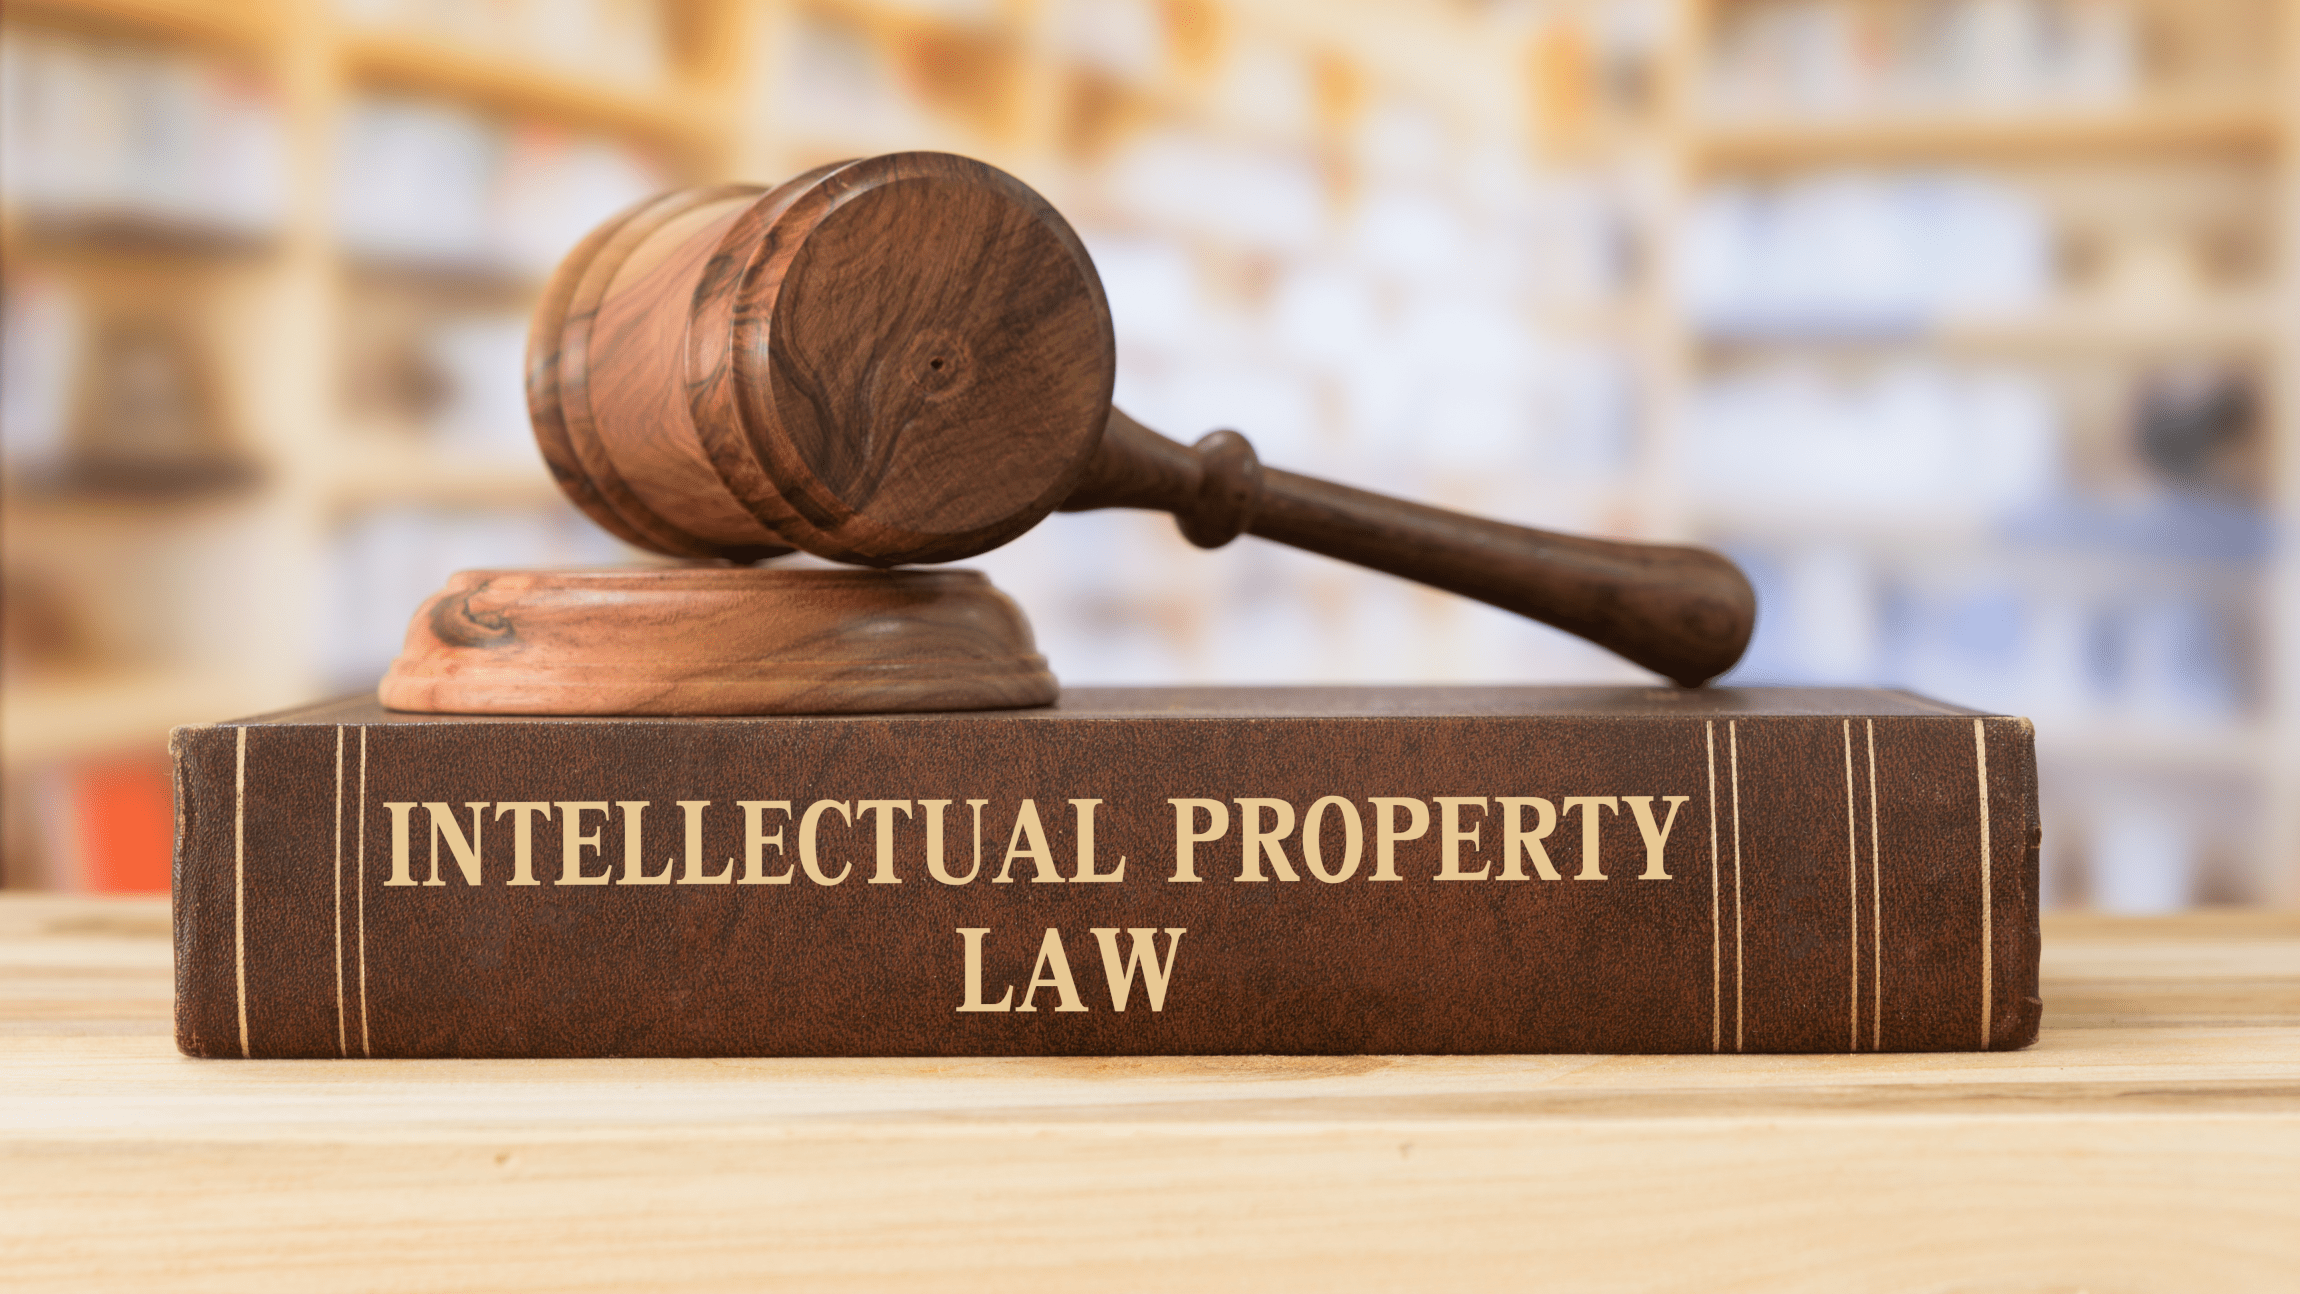 Intellectural Property Law Converse Law